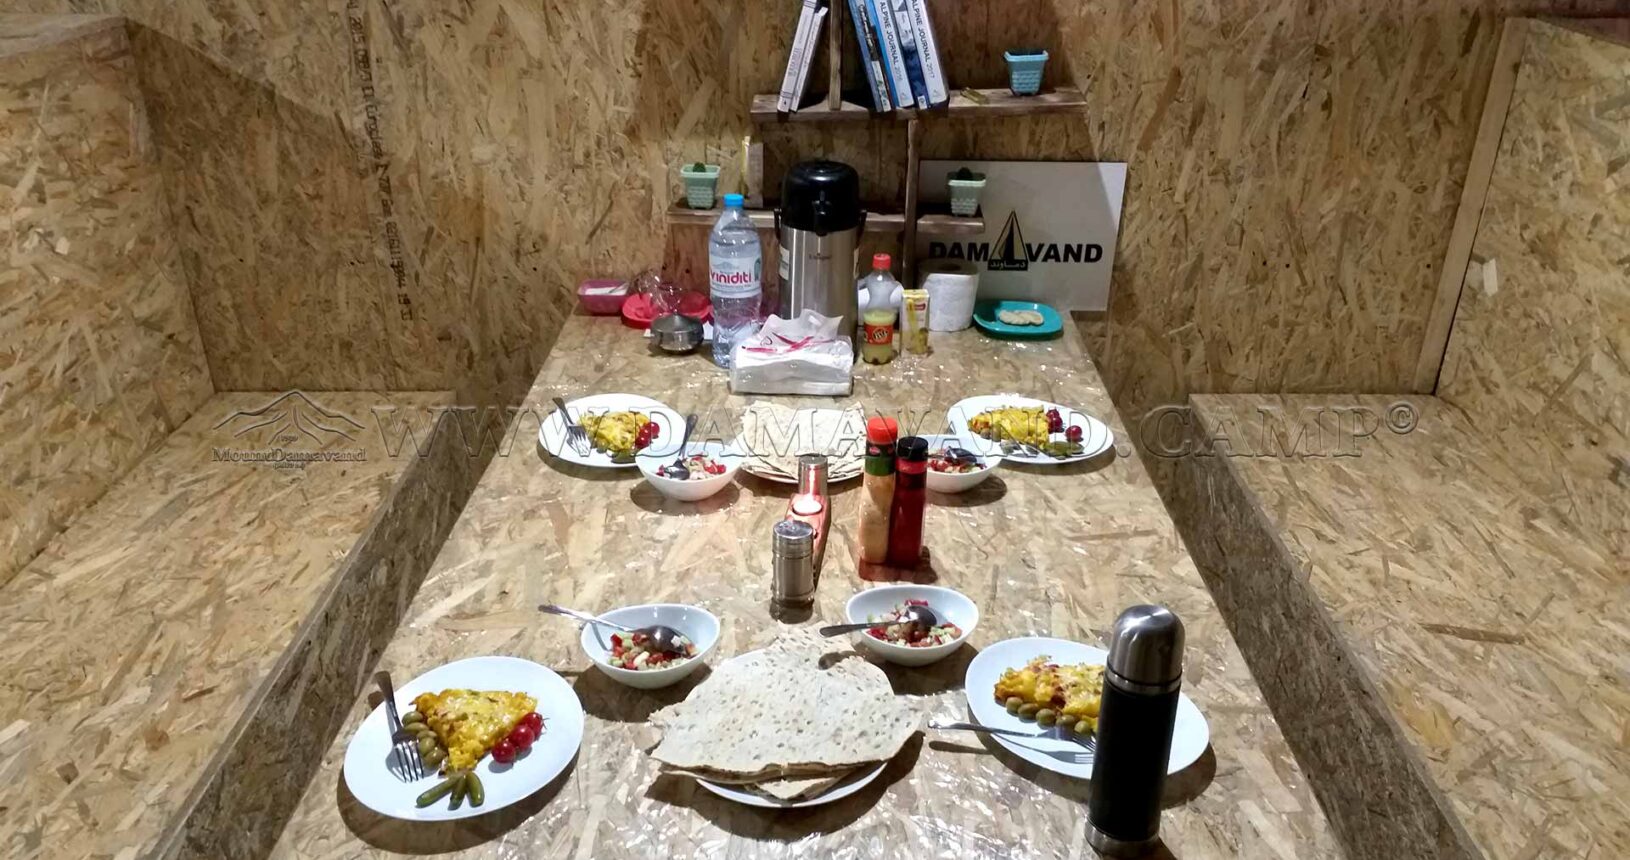 Dining at Damavand: A table set with meals for climbers in the old hut at Camp 3.